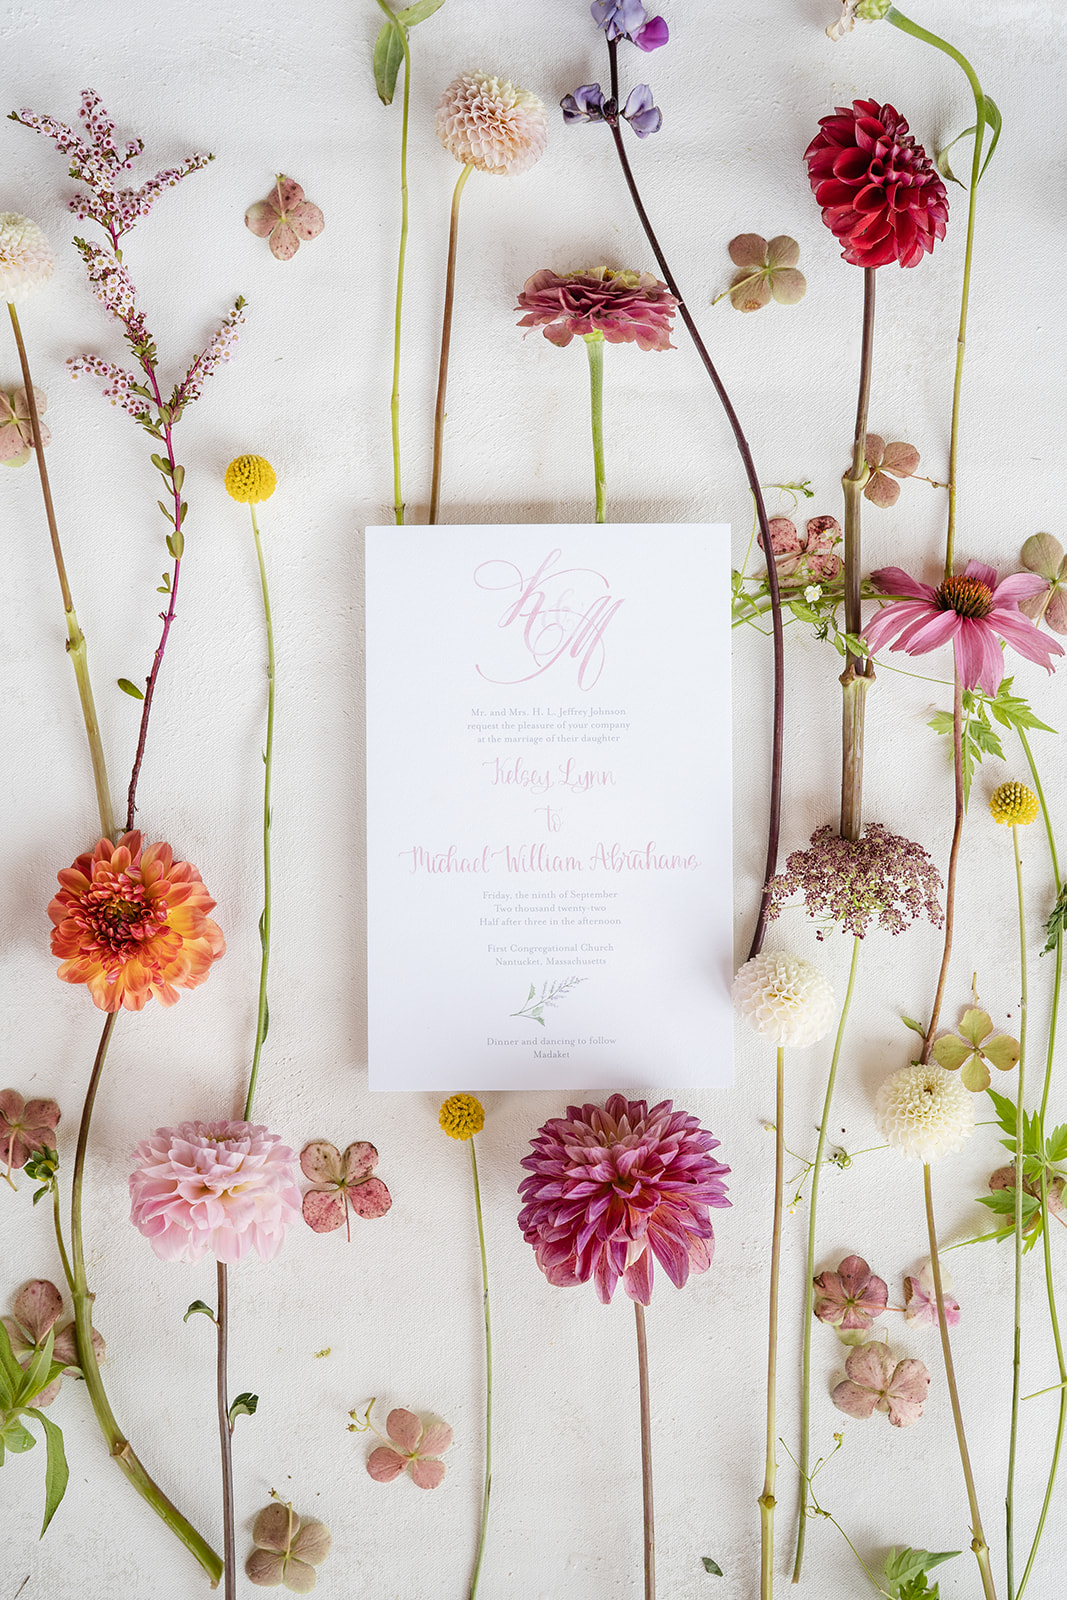 Wedding invitation on white paper with pink font flat layed on flowers with long, delicate stems